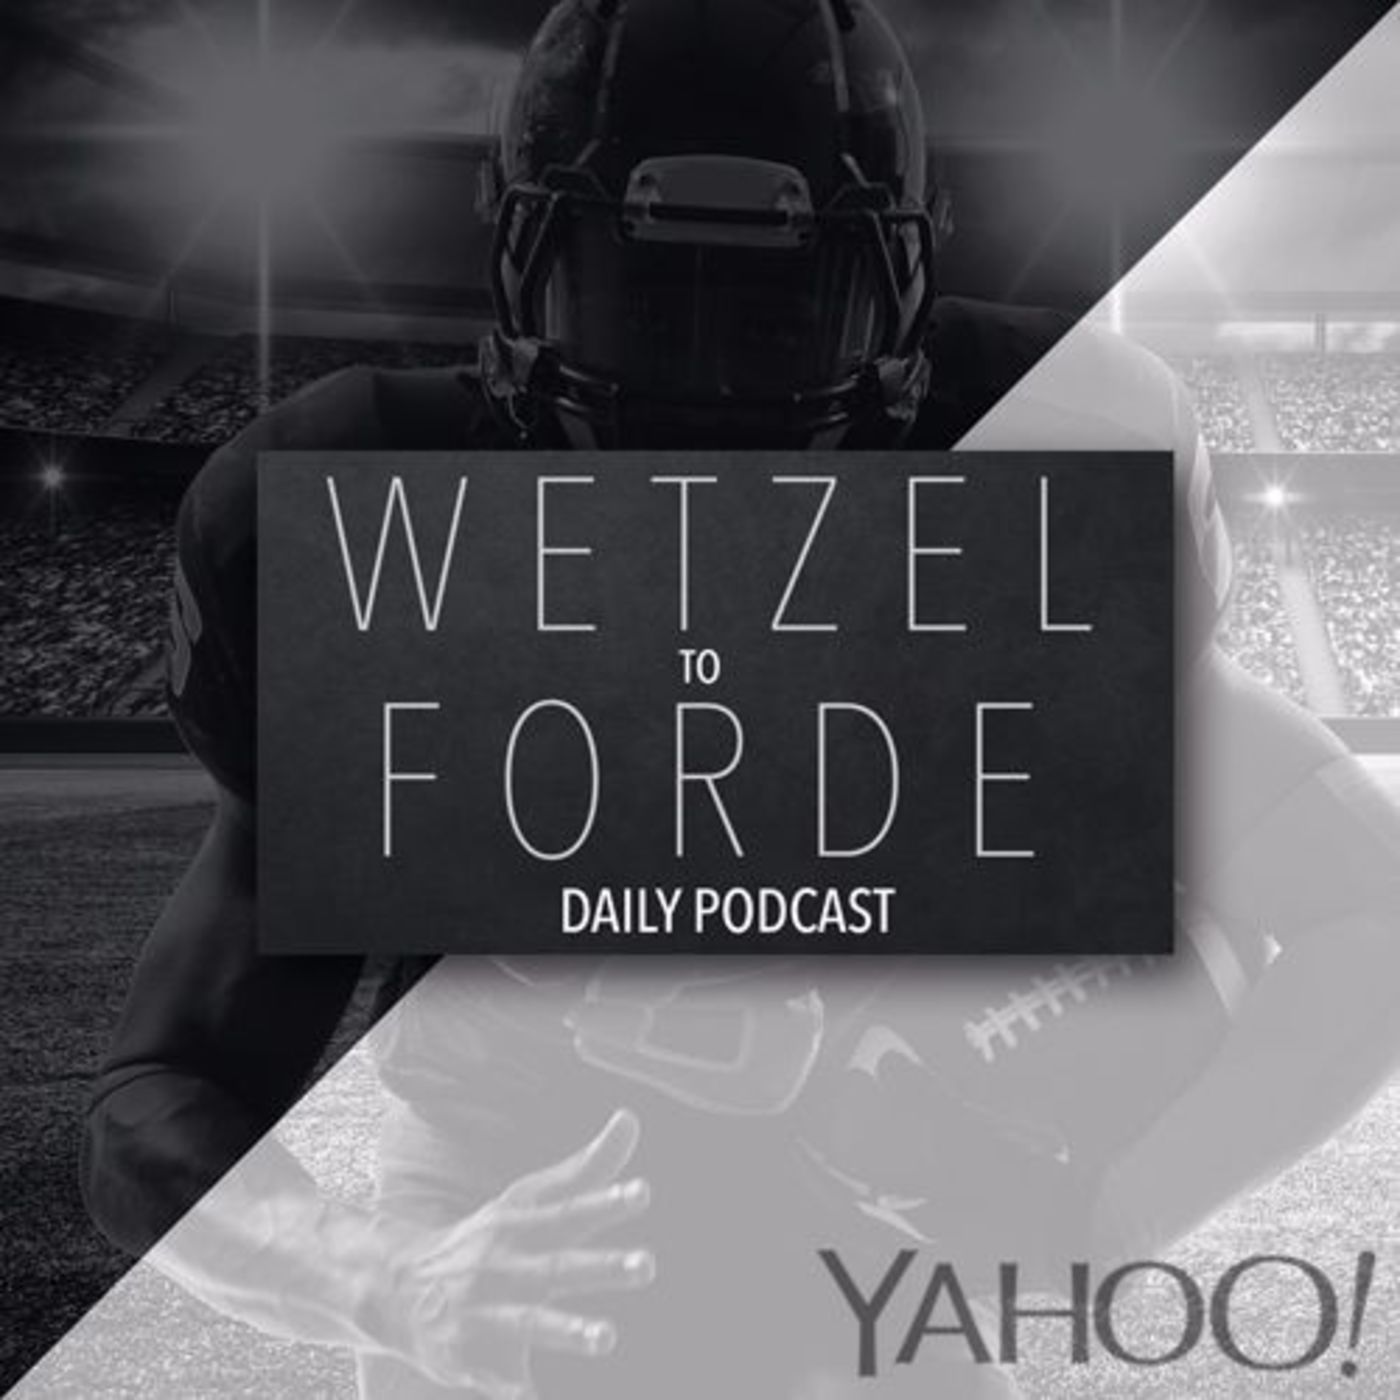 Should Brady have to discuss Trump? Wetzel To Forde (12 - 17 - 15)